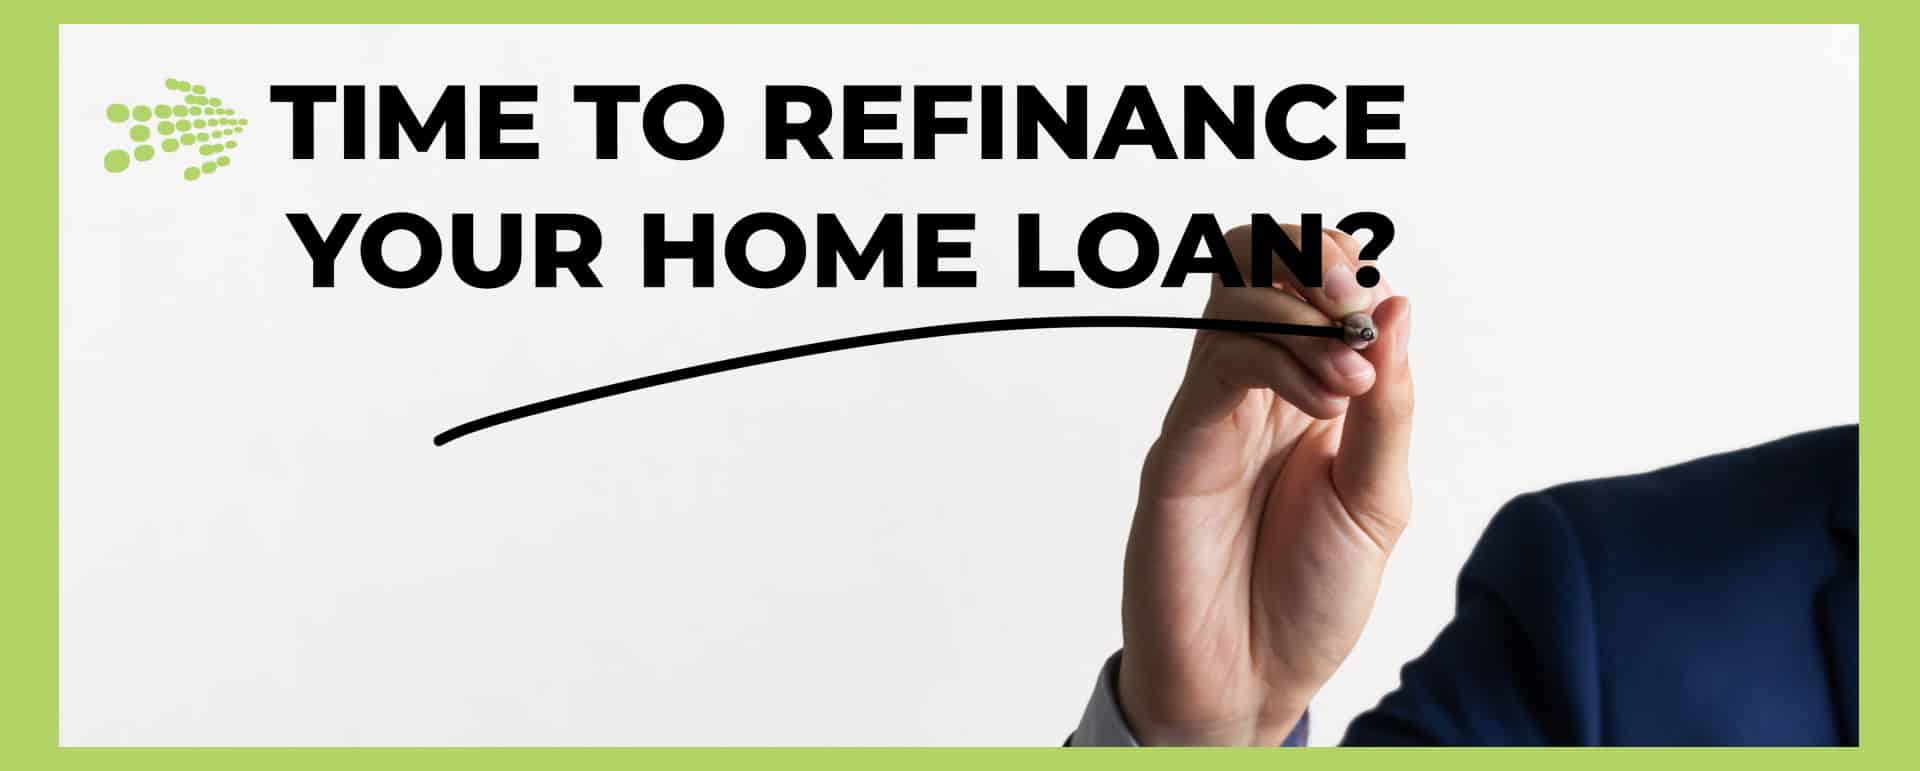 Refinance home loan - FirstPoint Mortgage Brokers